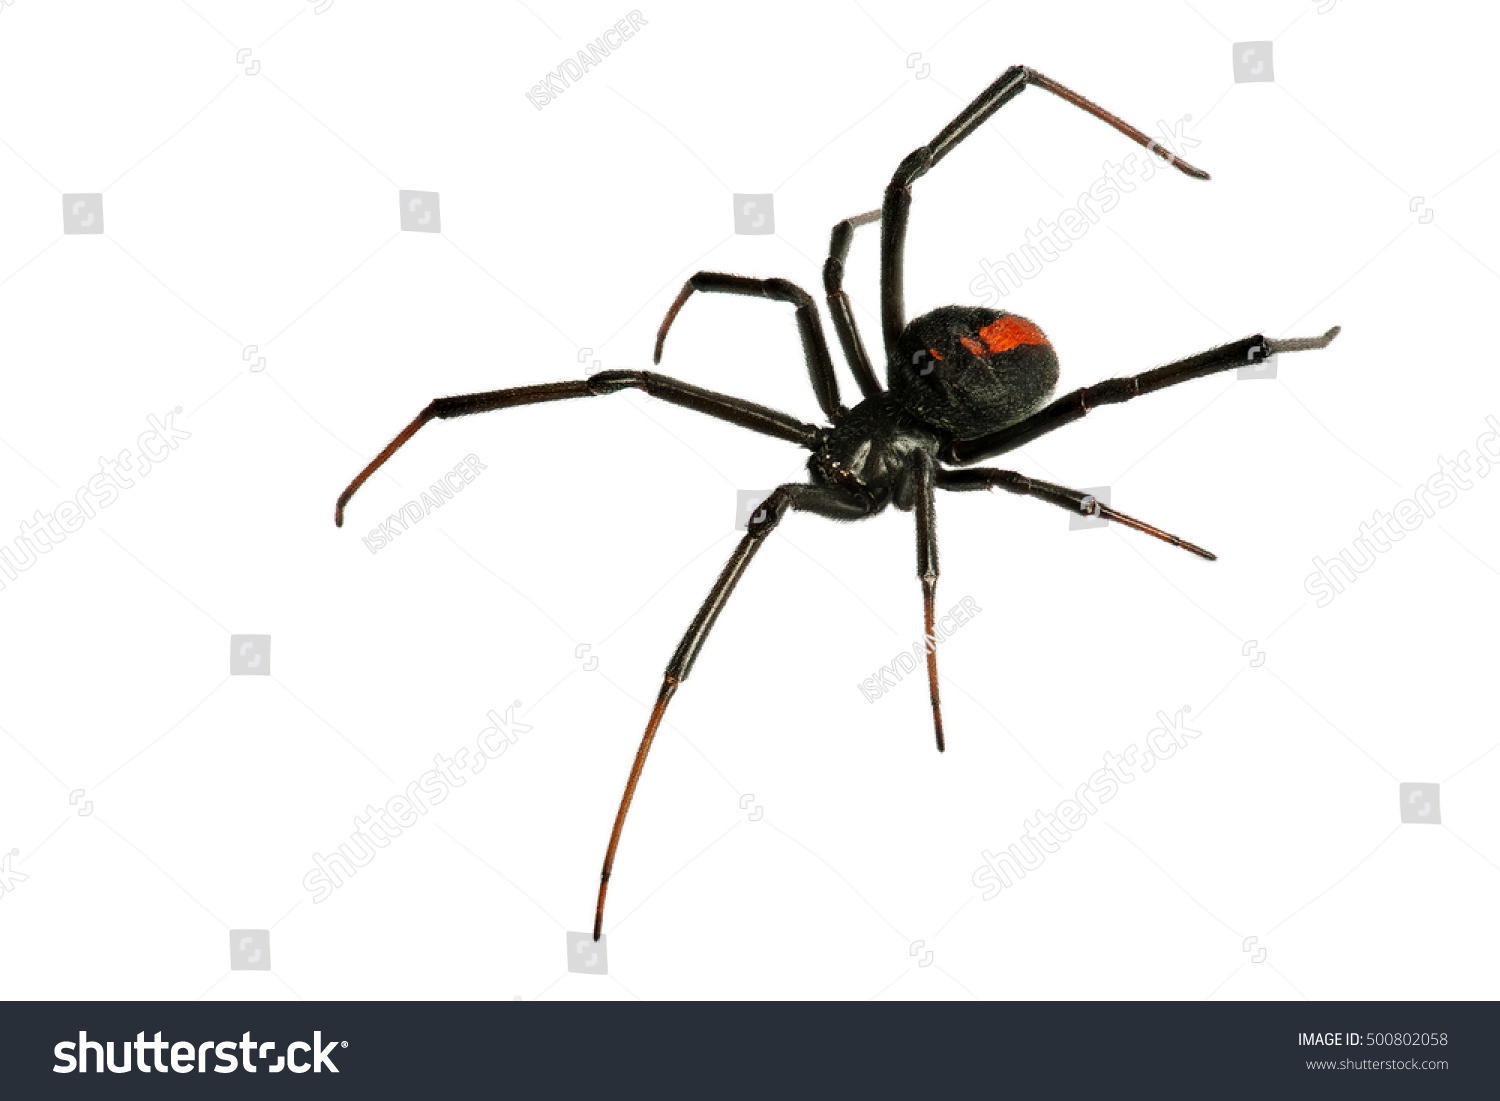 Black Widow Spider / red back spider Isolated on White Background deep focus #500802058